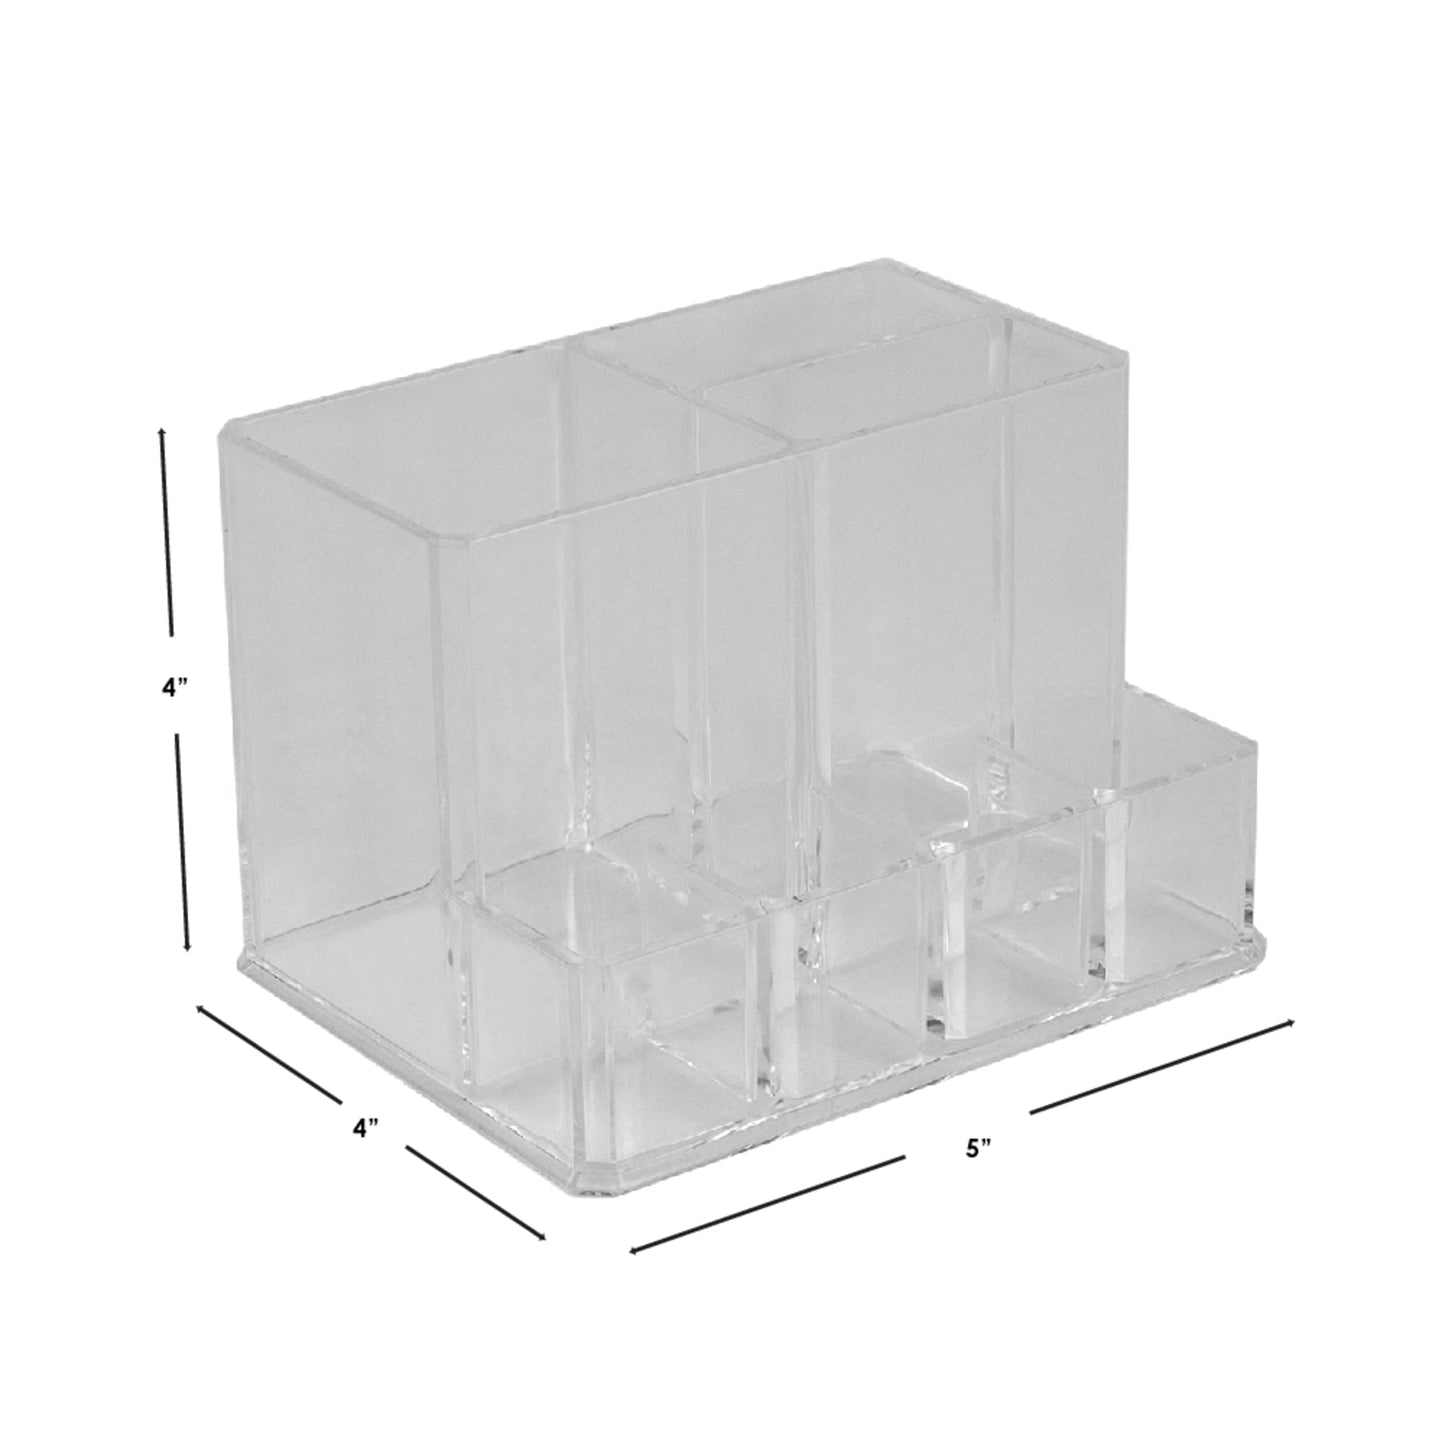 Compact Shatter-Resistant Plastic Cosmetic Organizer, Clear